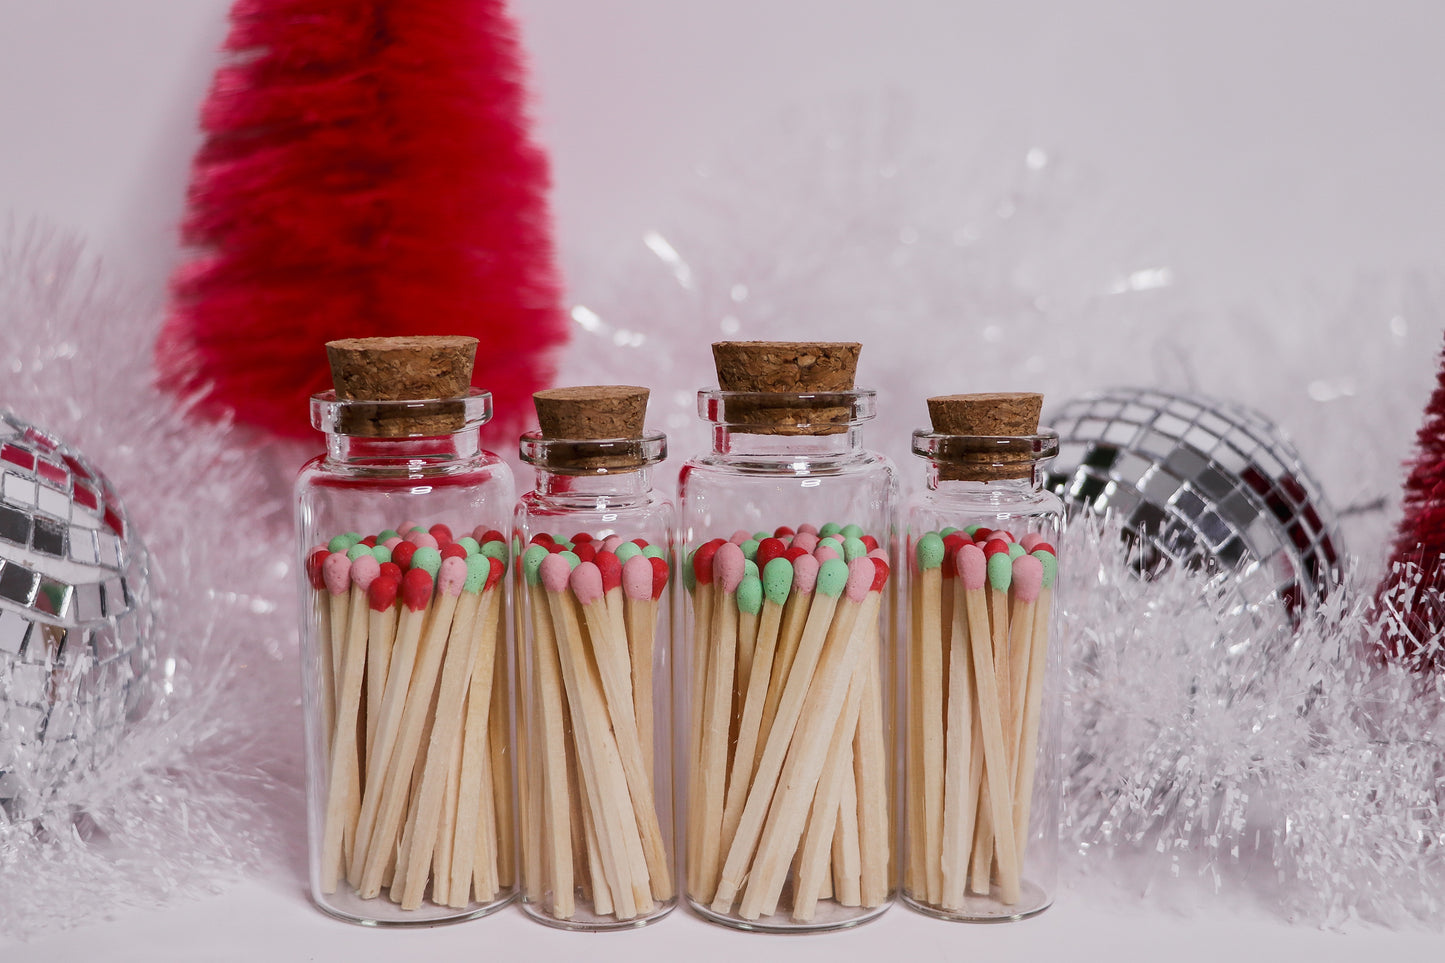 Kitschy Christmas Matches in Medium Corked Vial